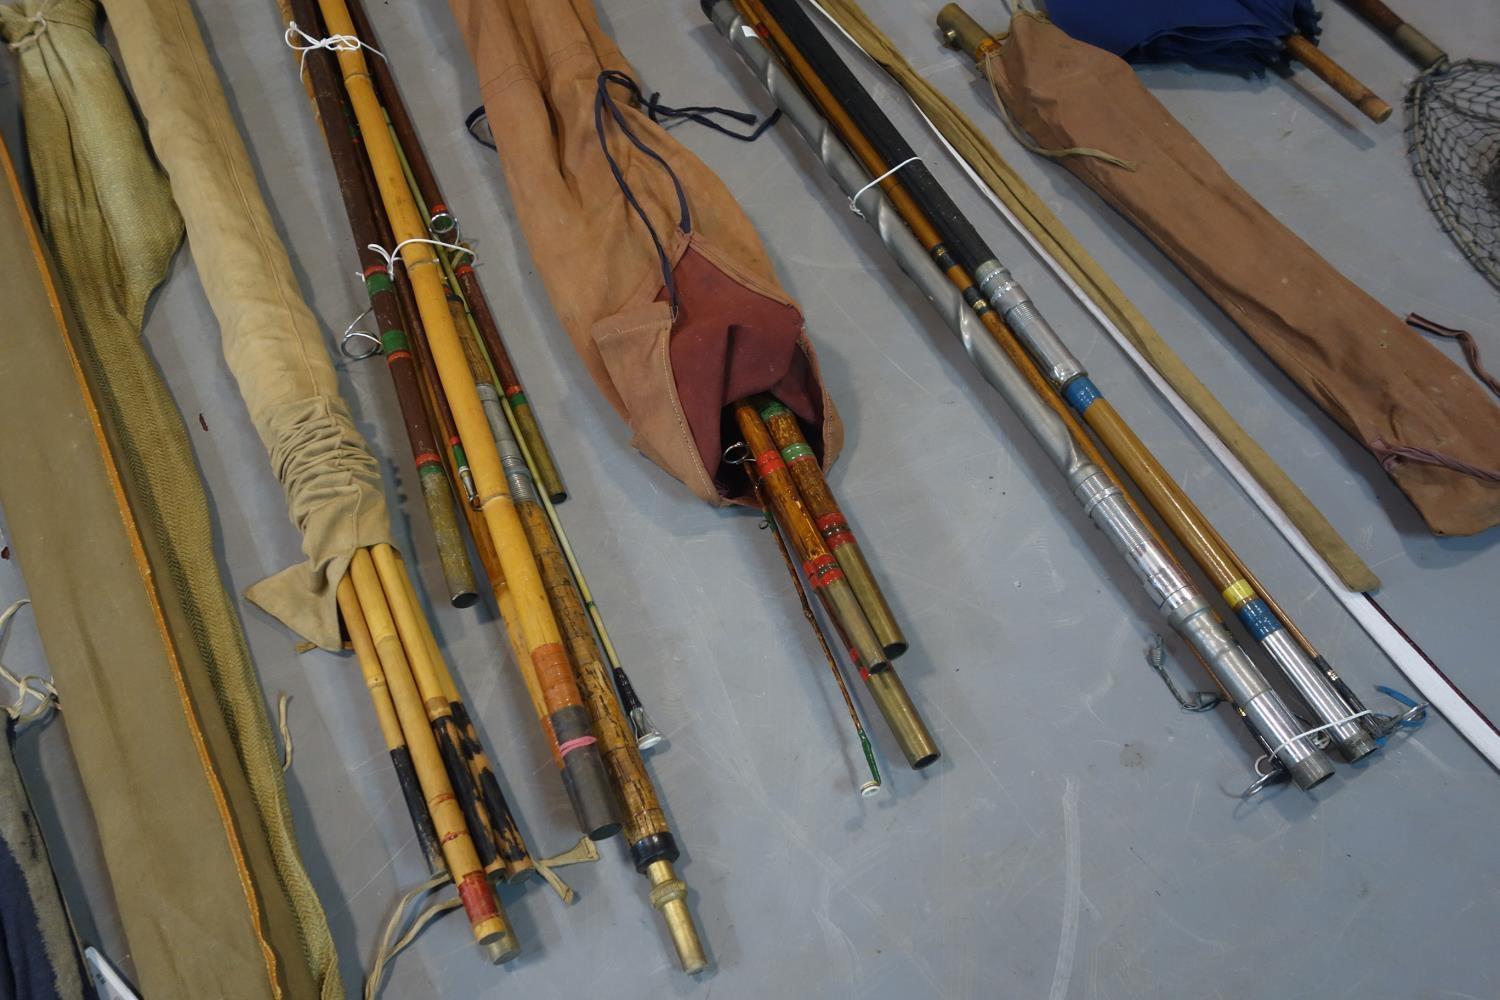 A collection of 10 vintage fishing rods to include 2 split cane and 8 bamboo, together with an - Image 2 of 3